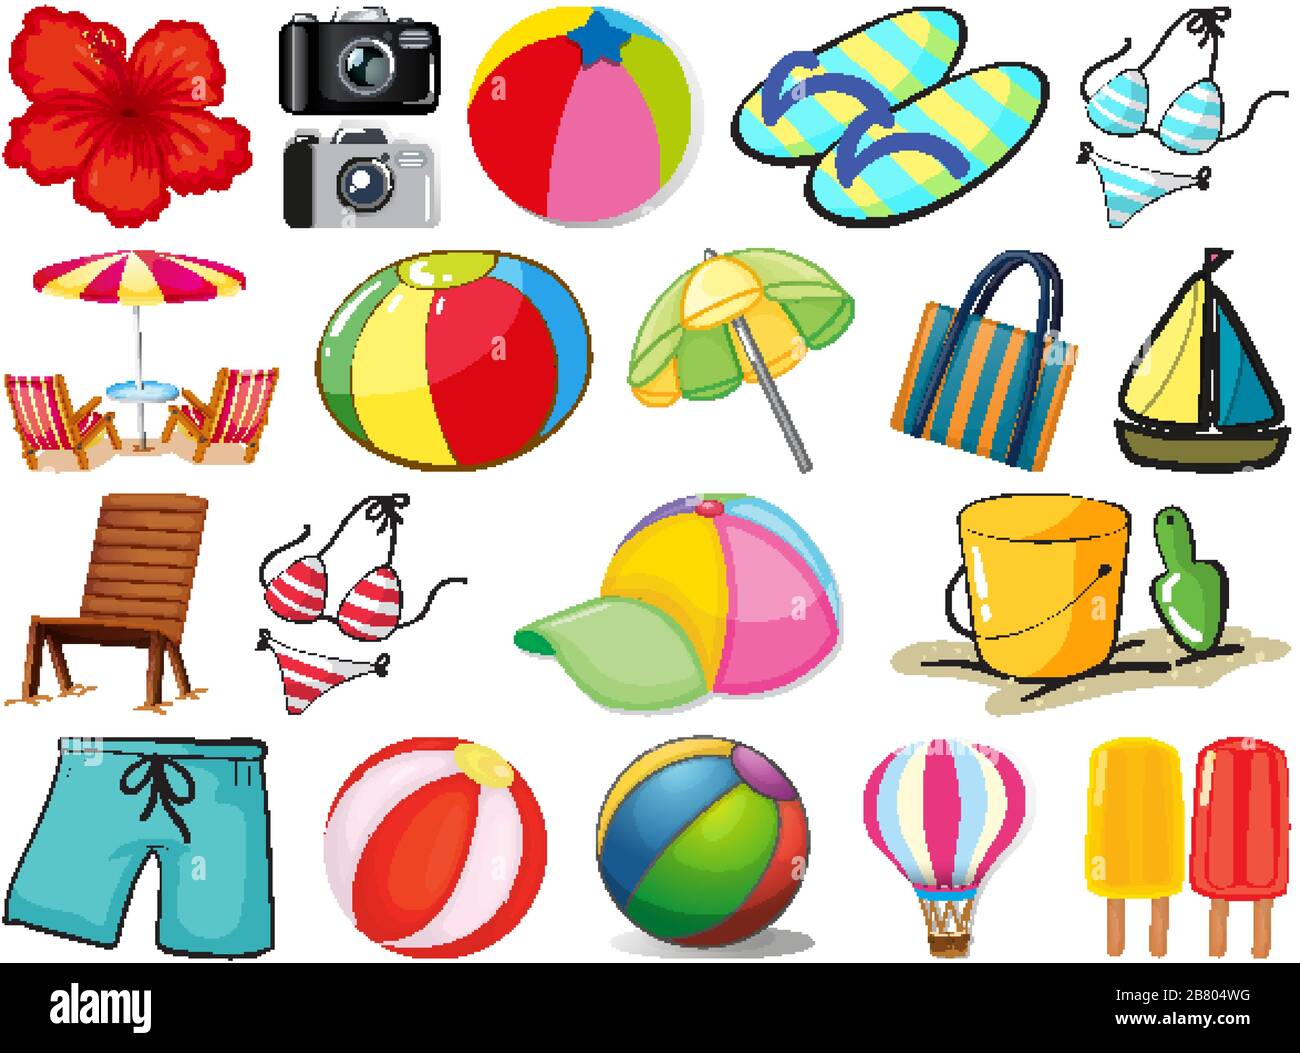 Large set of different summer objects on white background illustration ...